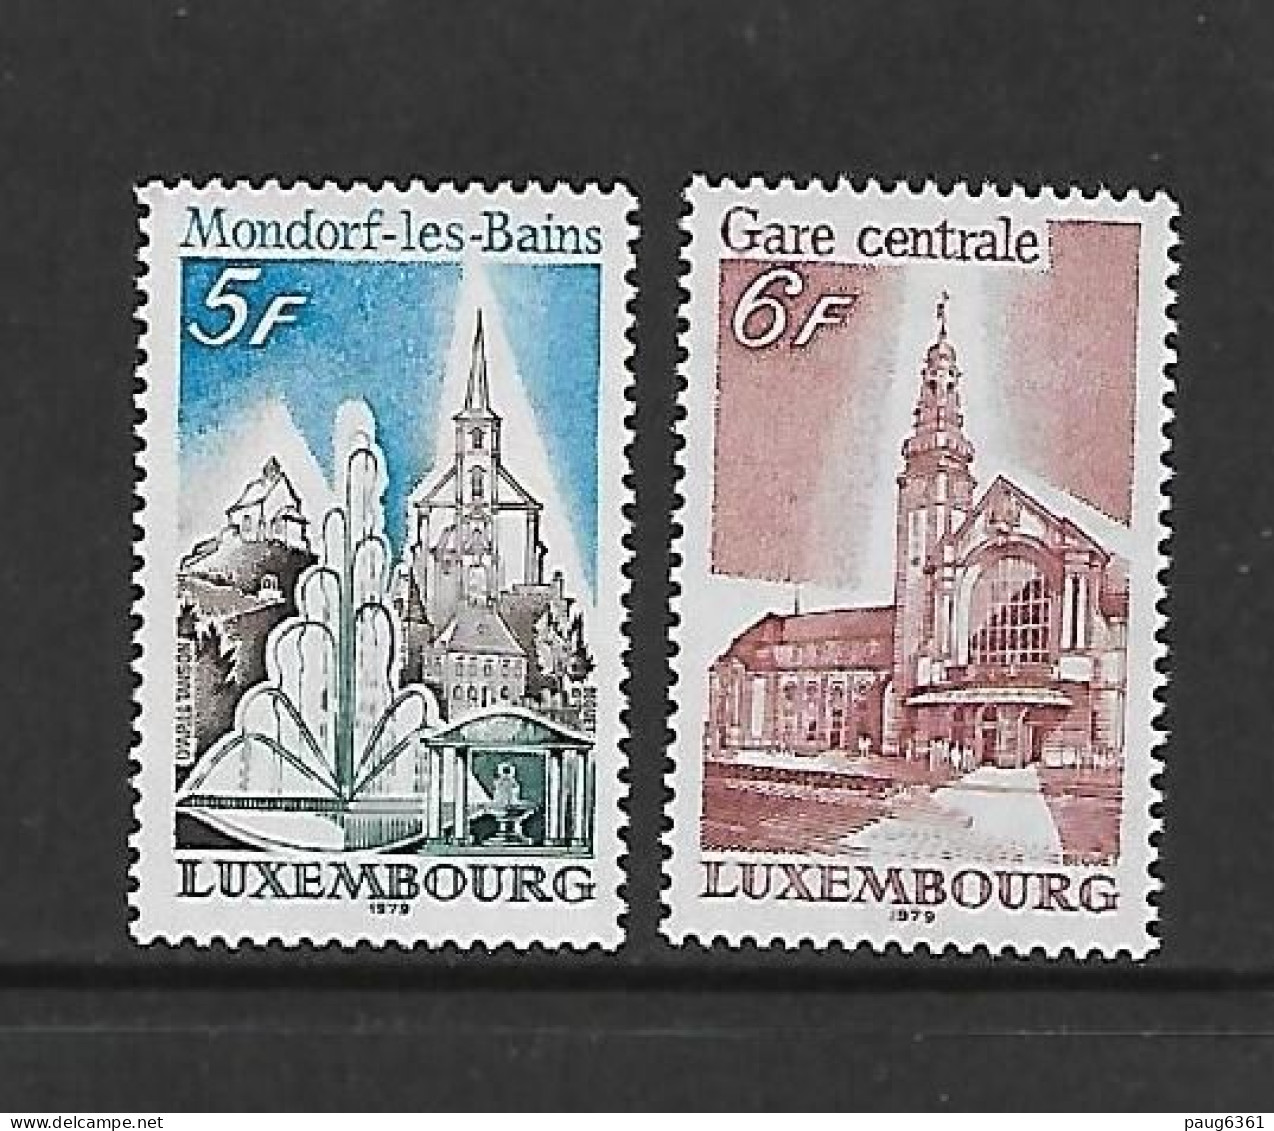 LUXEMBOURG 1979 TRAINS-GARES YVERT N°935/936 NEUF MNH** - Trains